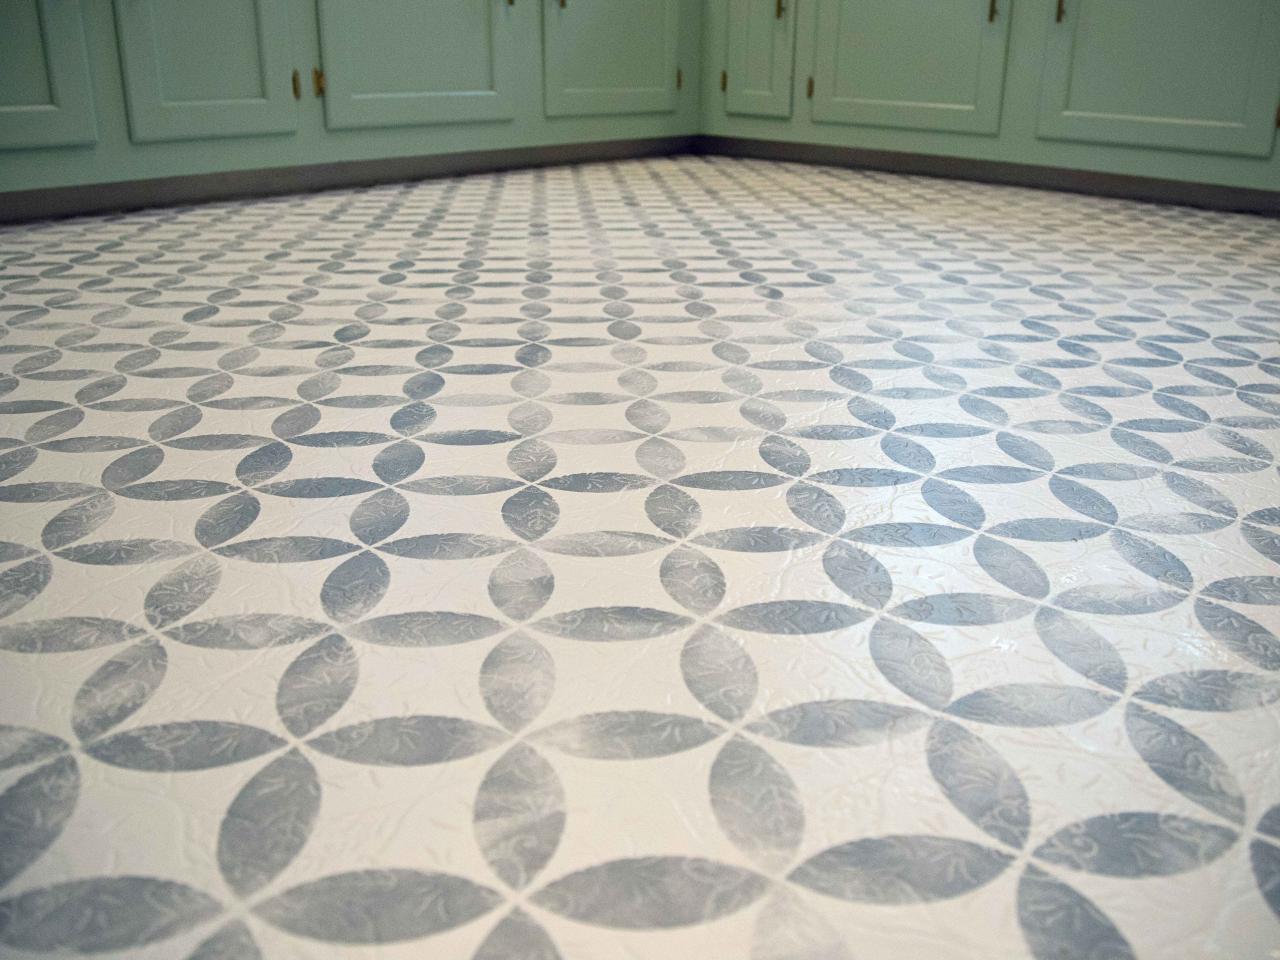 How To Paint Old Vinyl Floors Look, Can Floor Paint Be Used On Tiles